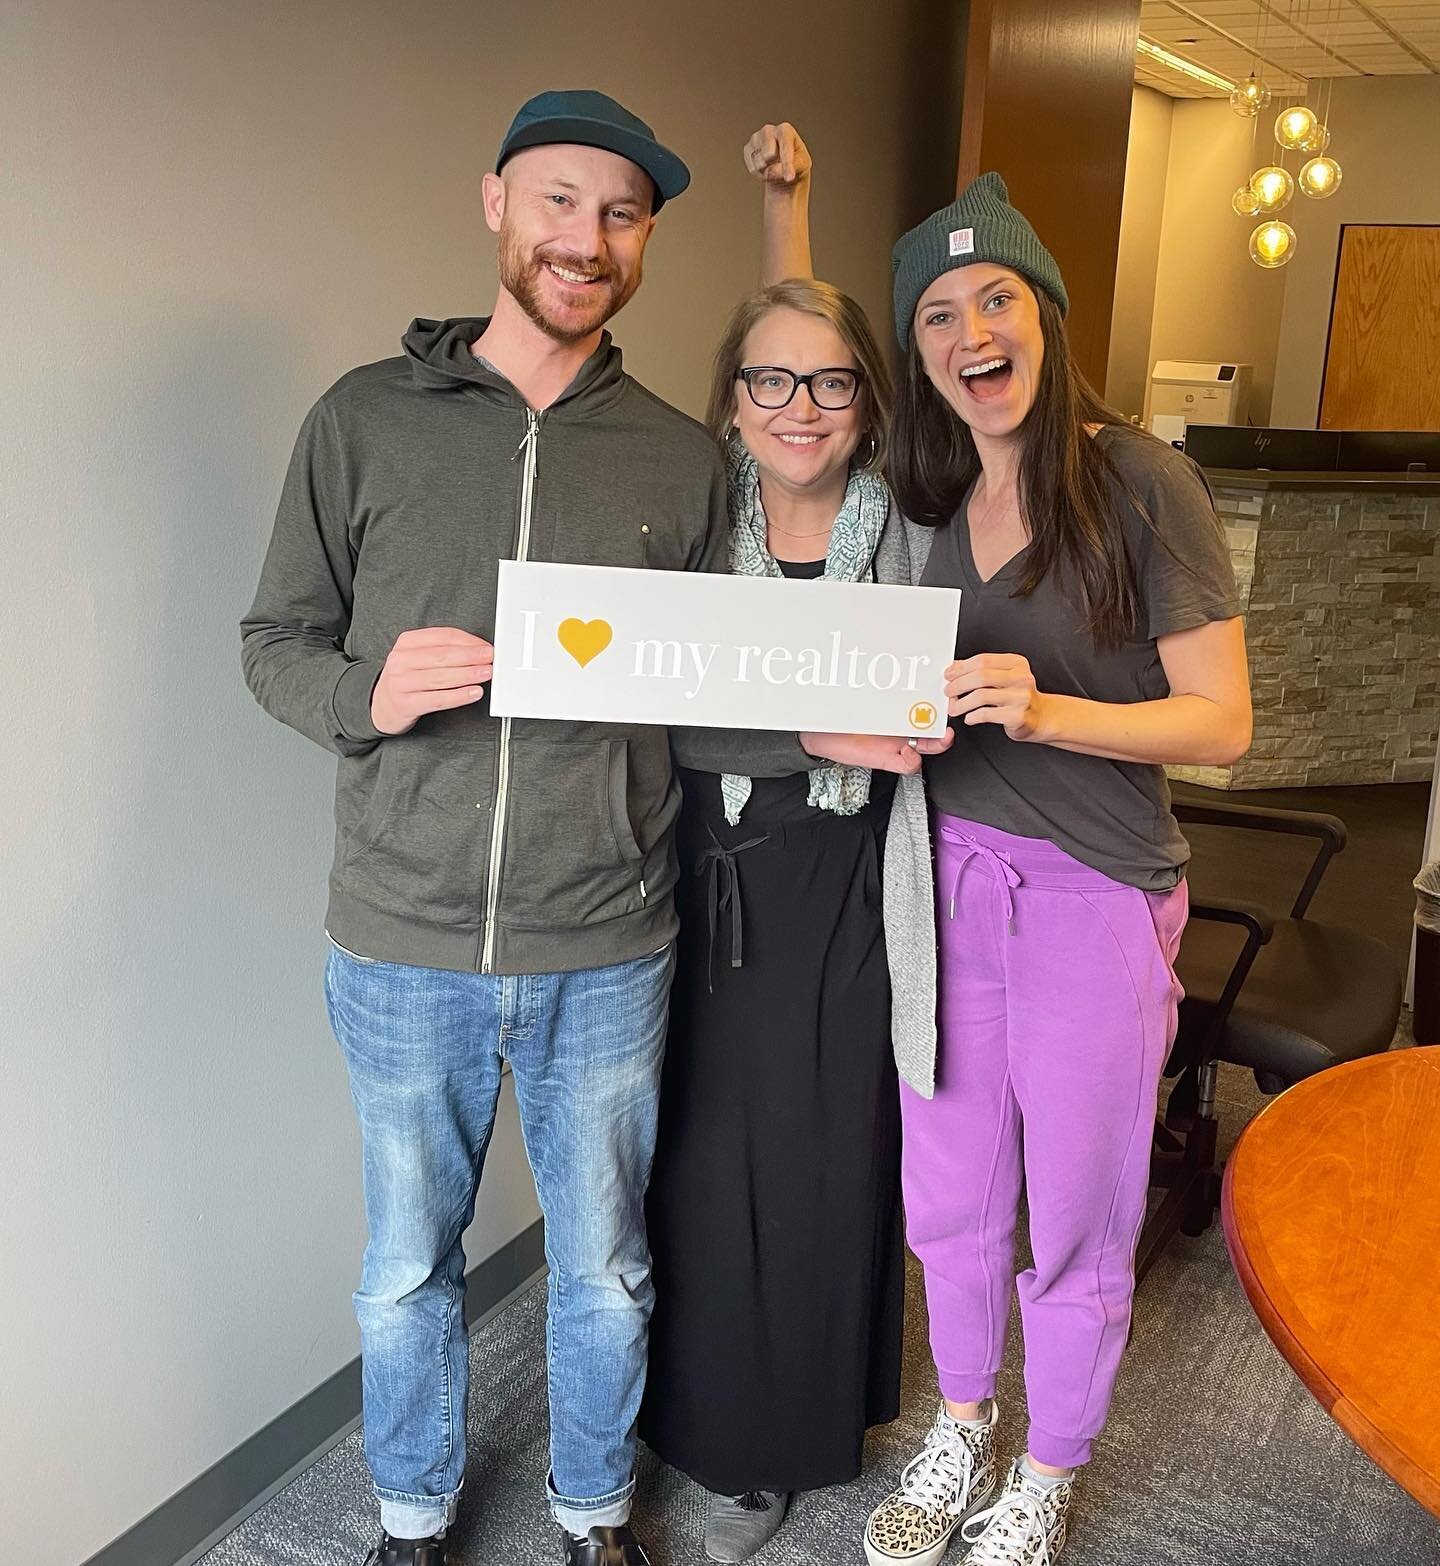 ✨CLOSING DAY!✨ A huge congratulations to our clients that closed on their new home! Such an exciting day - we are so happy for you! Thank you for letting us help you on this journey! Reach out to Amy@aspengrovere.com if you&rsquo;re looking to buy an